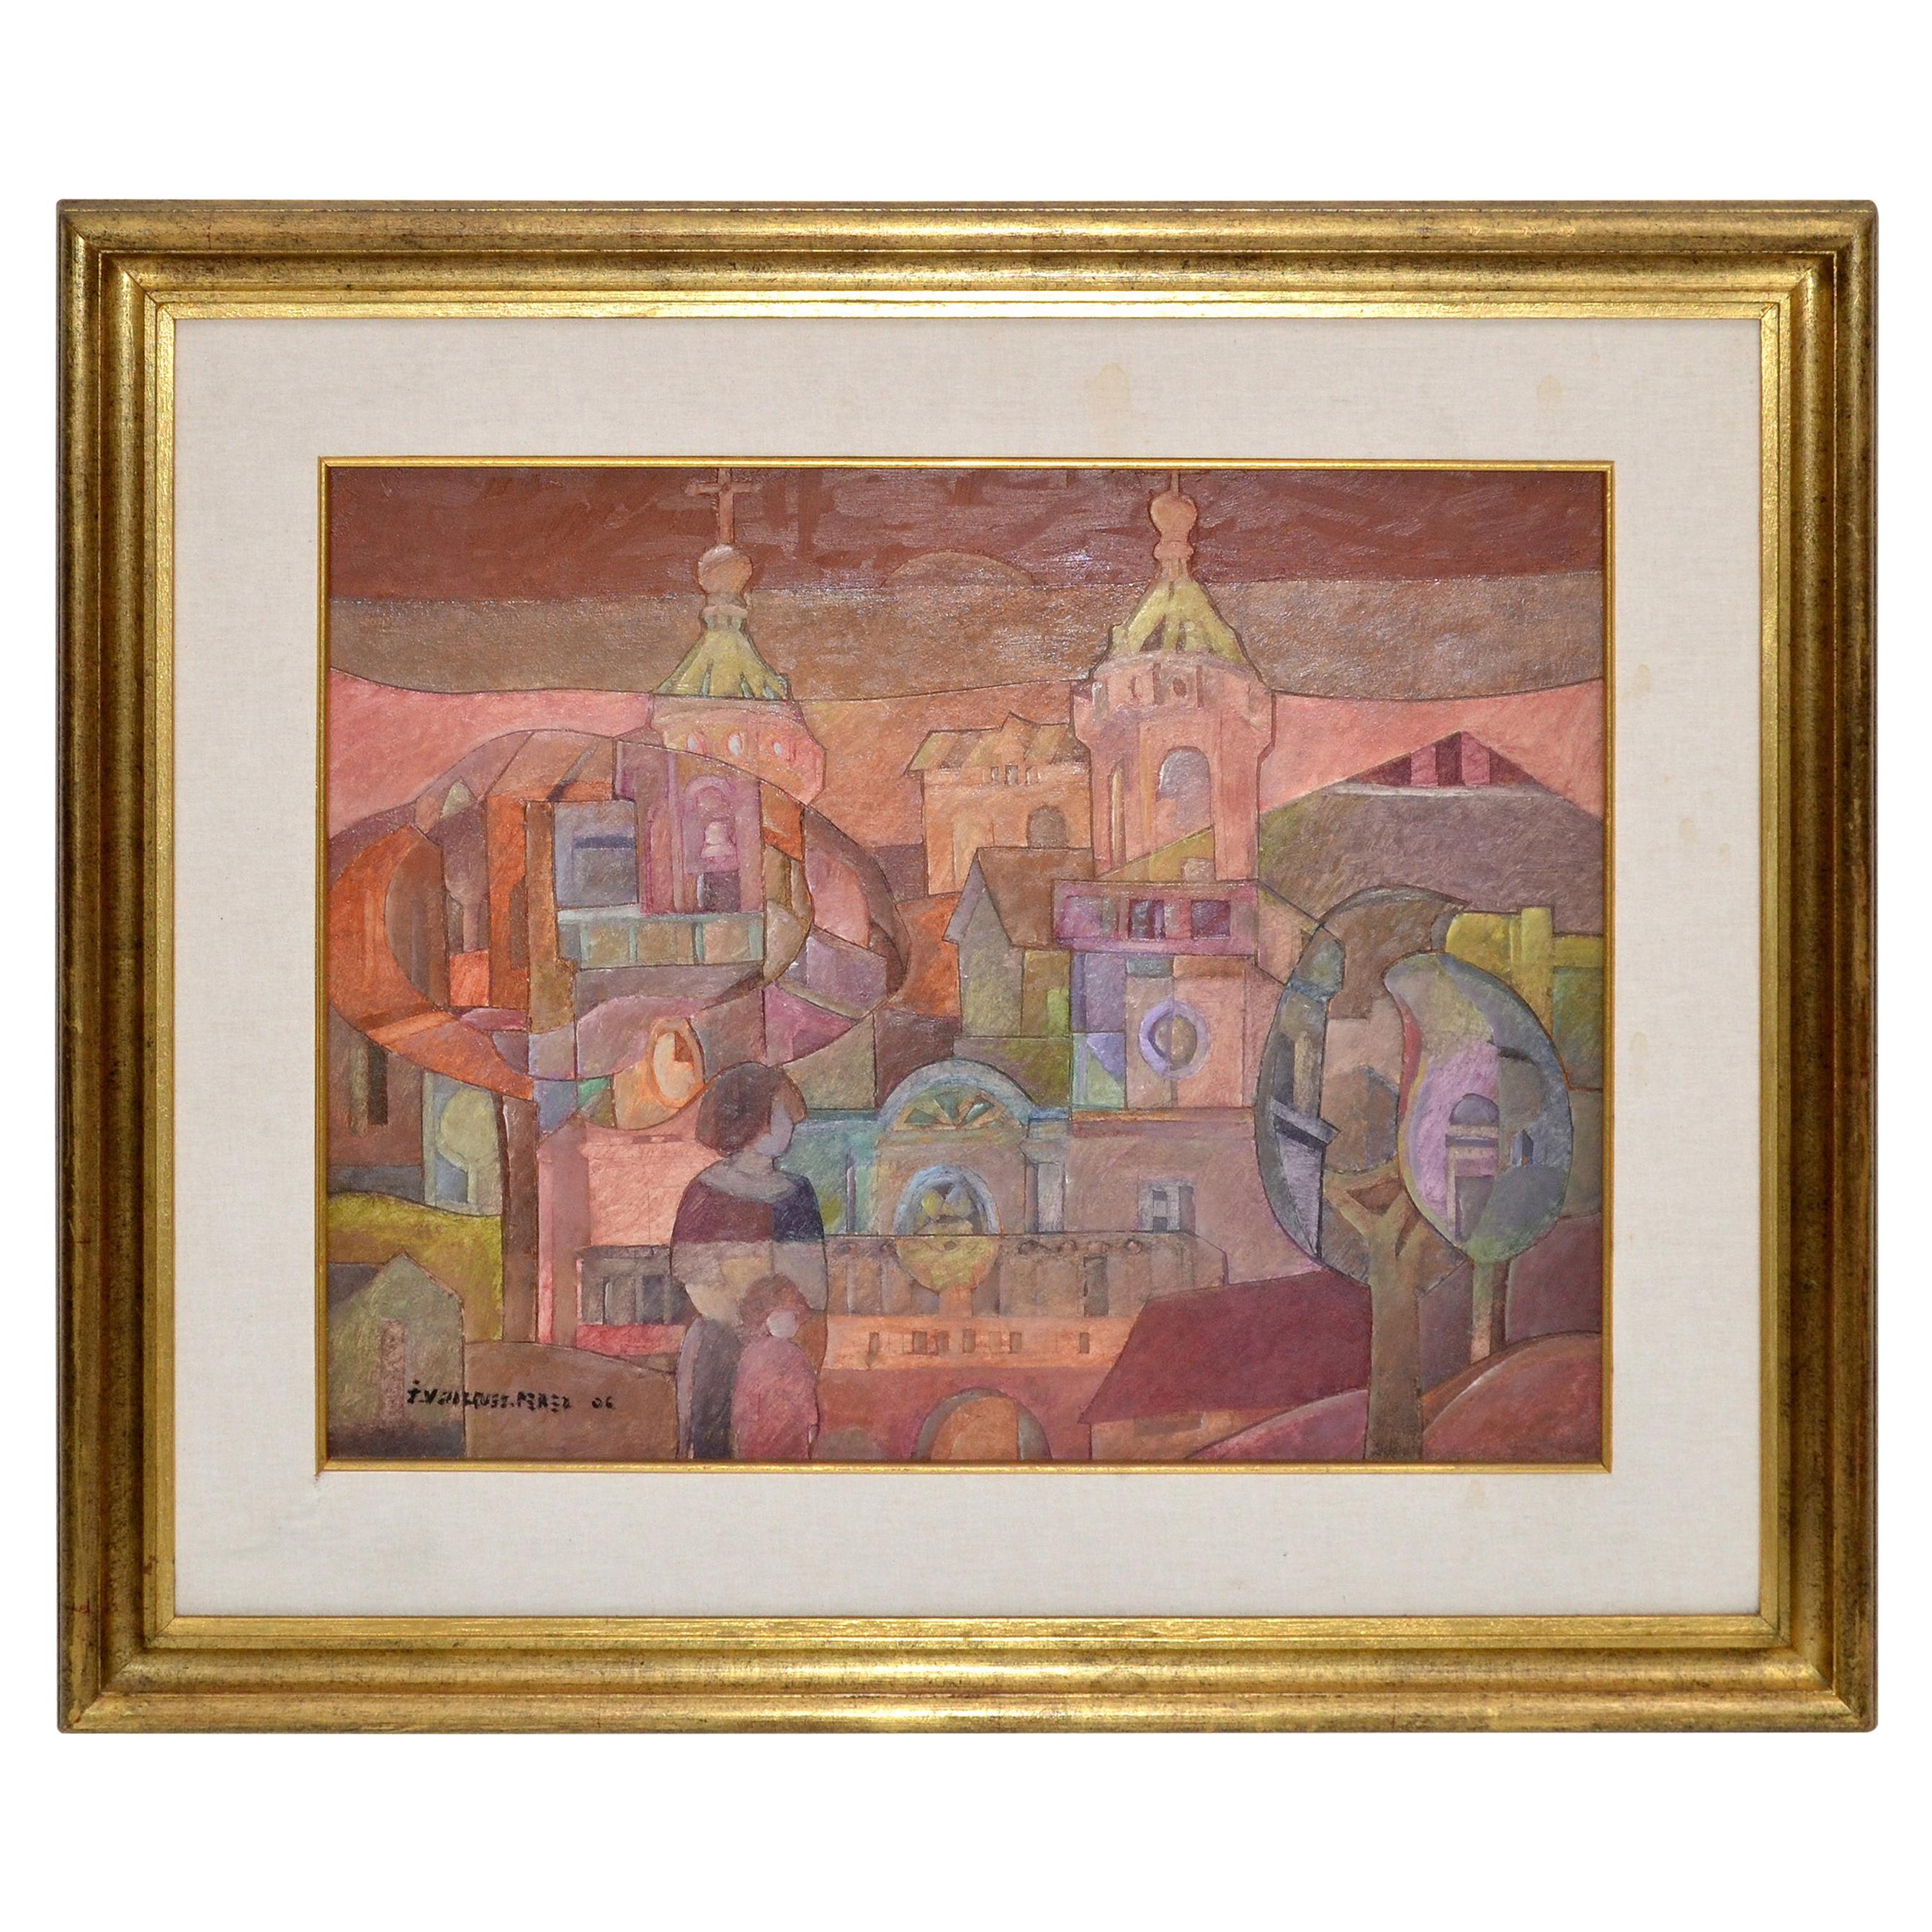 Signed Golden Framed South American Art Well-Known Uruguay Artist Painting 2006